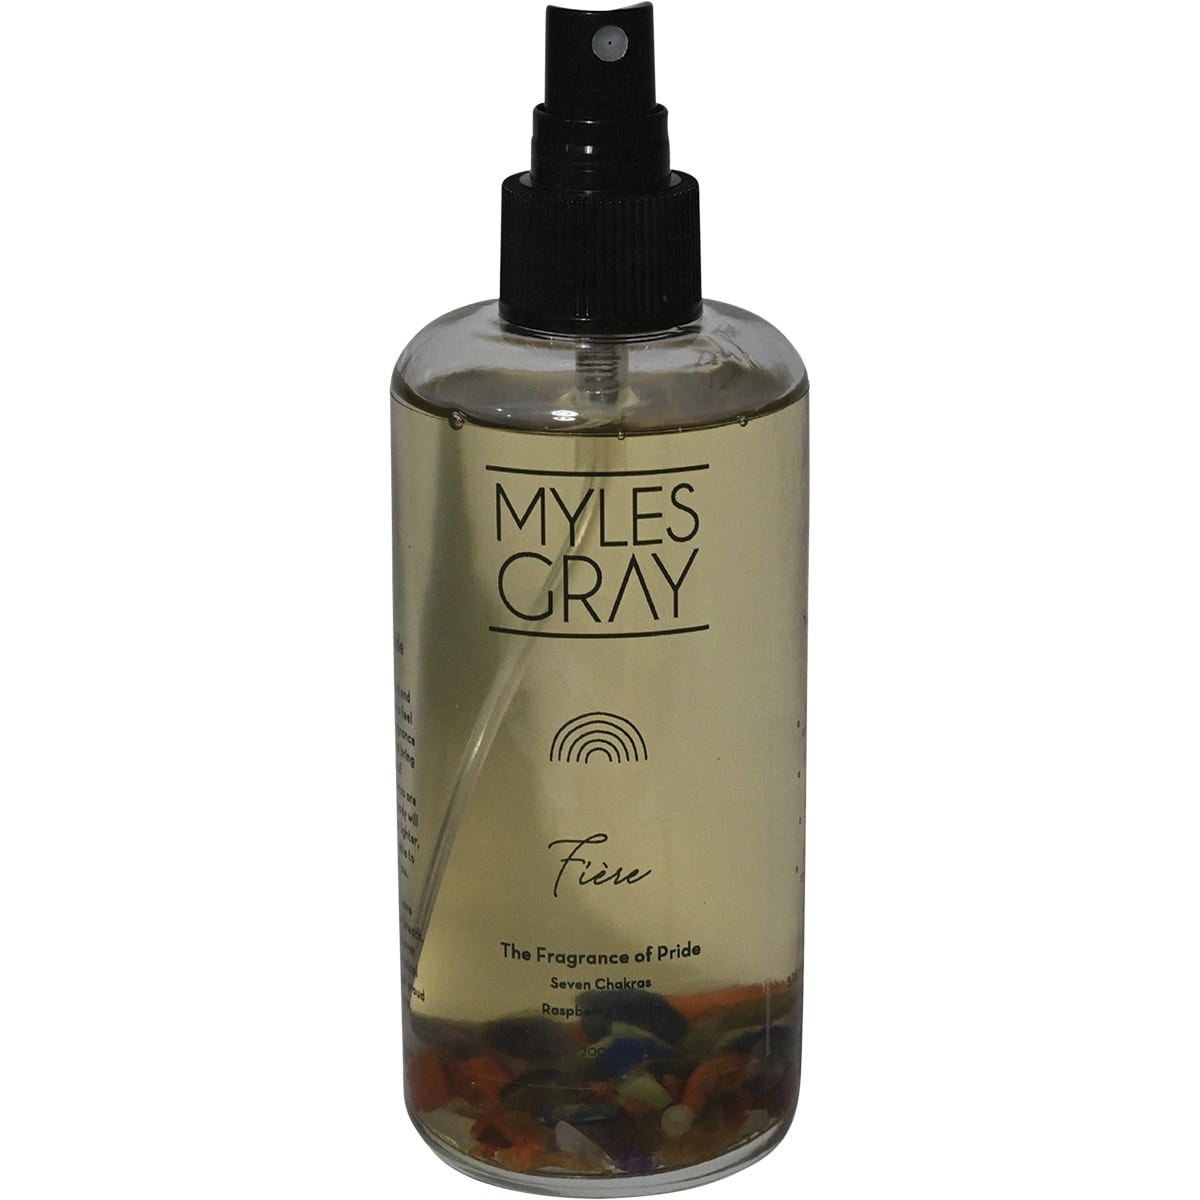 Myles Gray Crystal Infused Room Spray Pride Raspberry Vanilla 200ml - Dr Earth - Cleaning